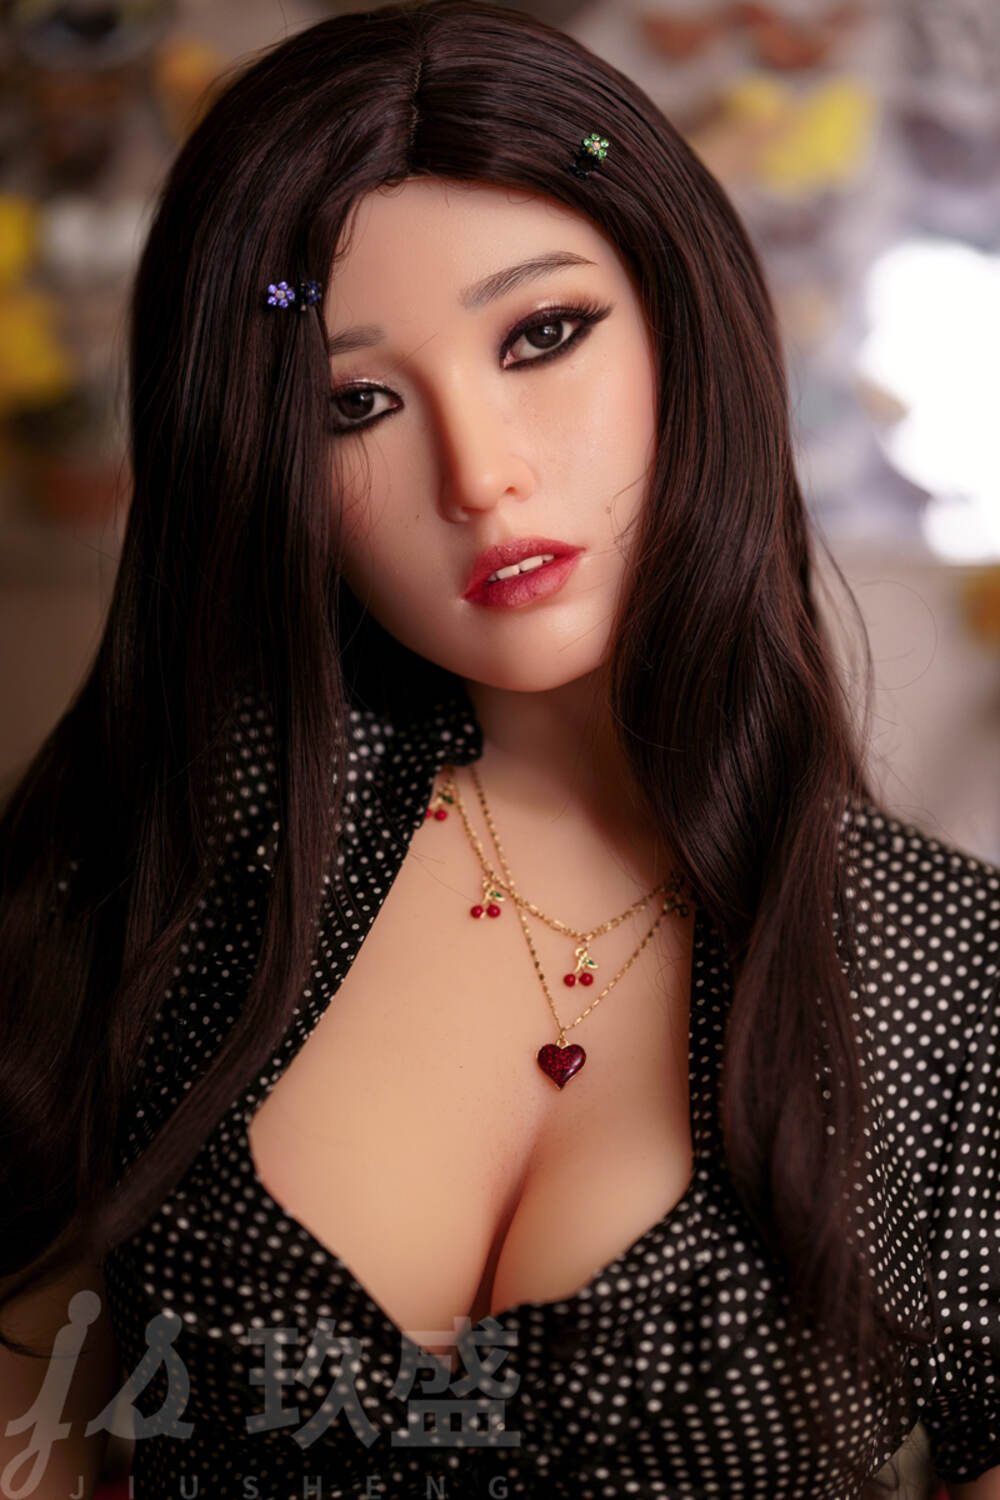 JIUSHENG DOLL 150cm/4ft11 Bambola sessuale con testa in silicone D-cup – Nicole